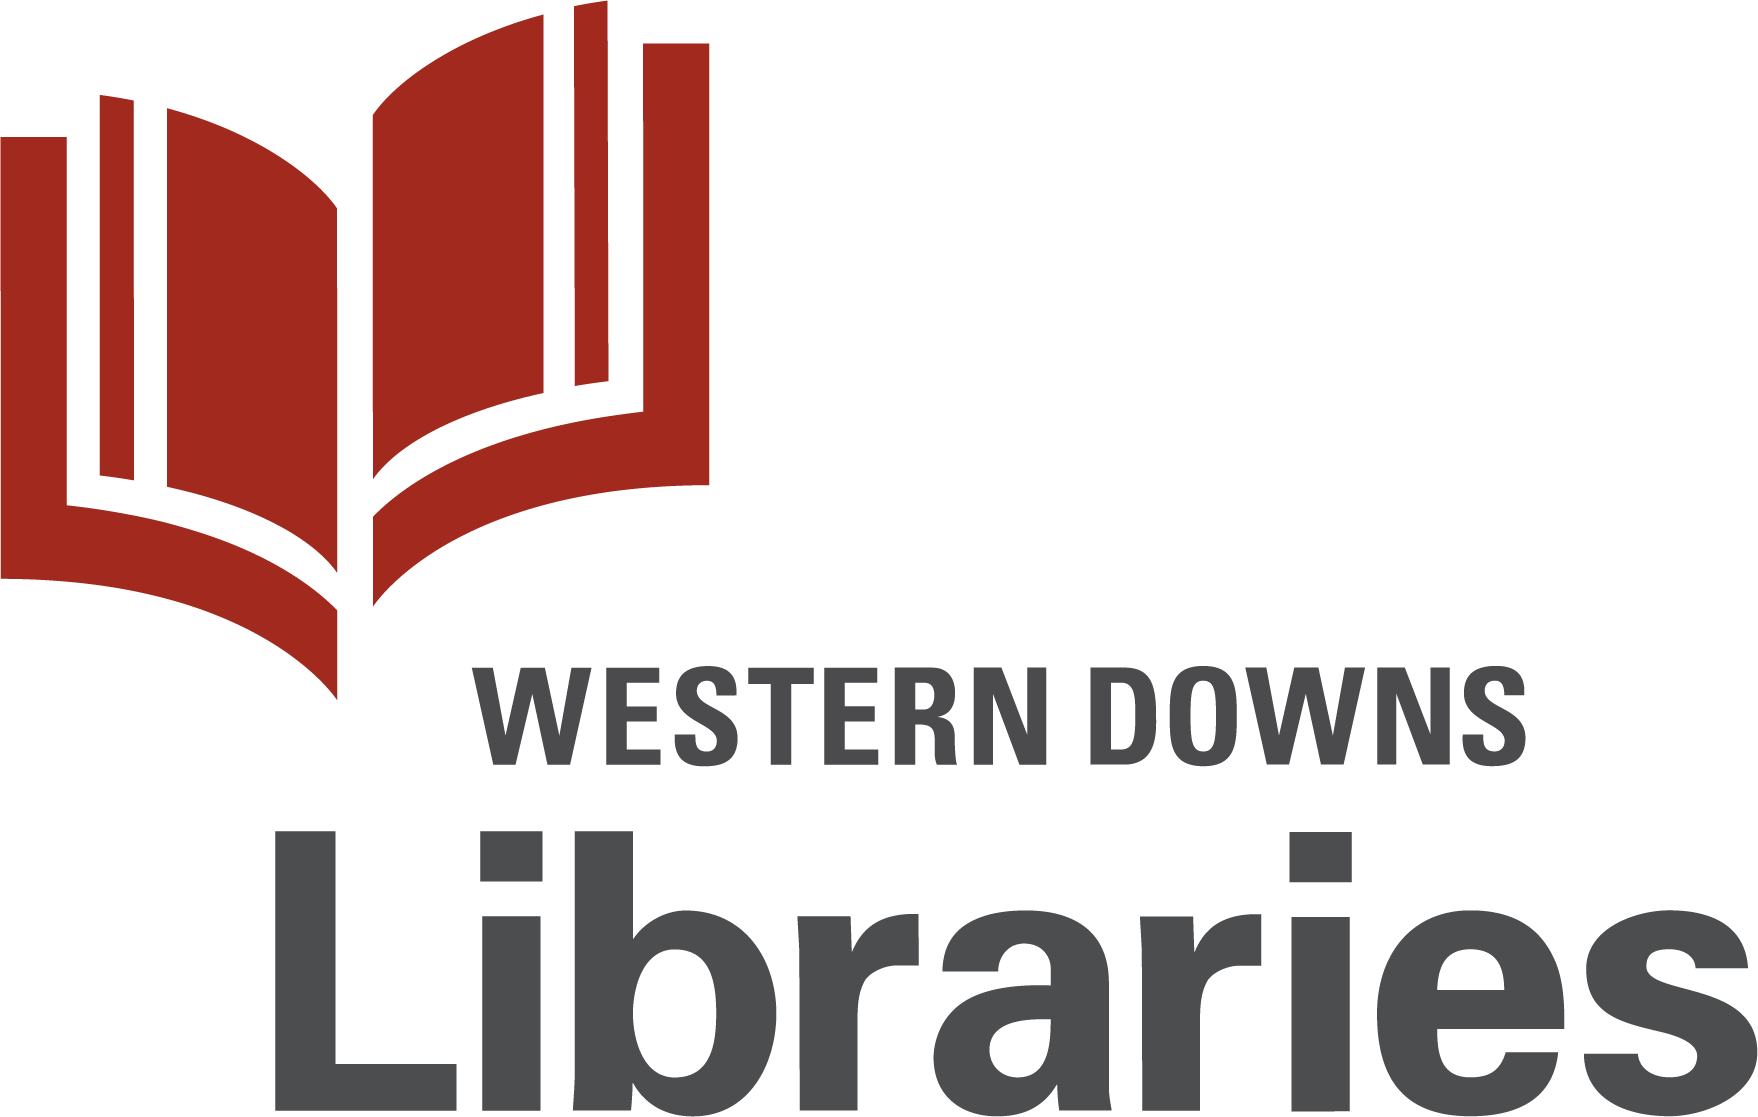 Western Downs Libraries